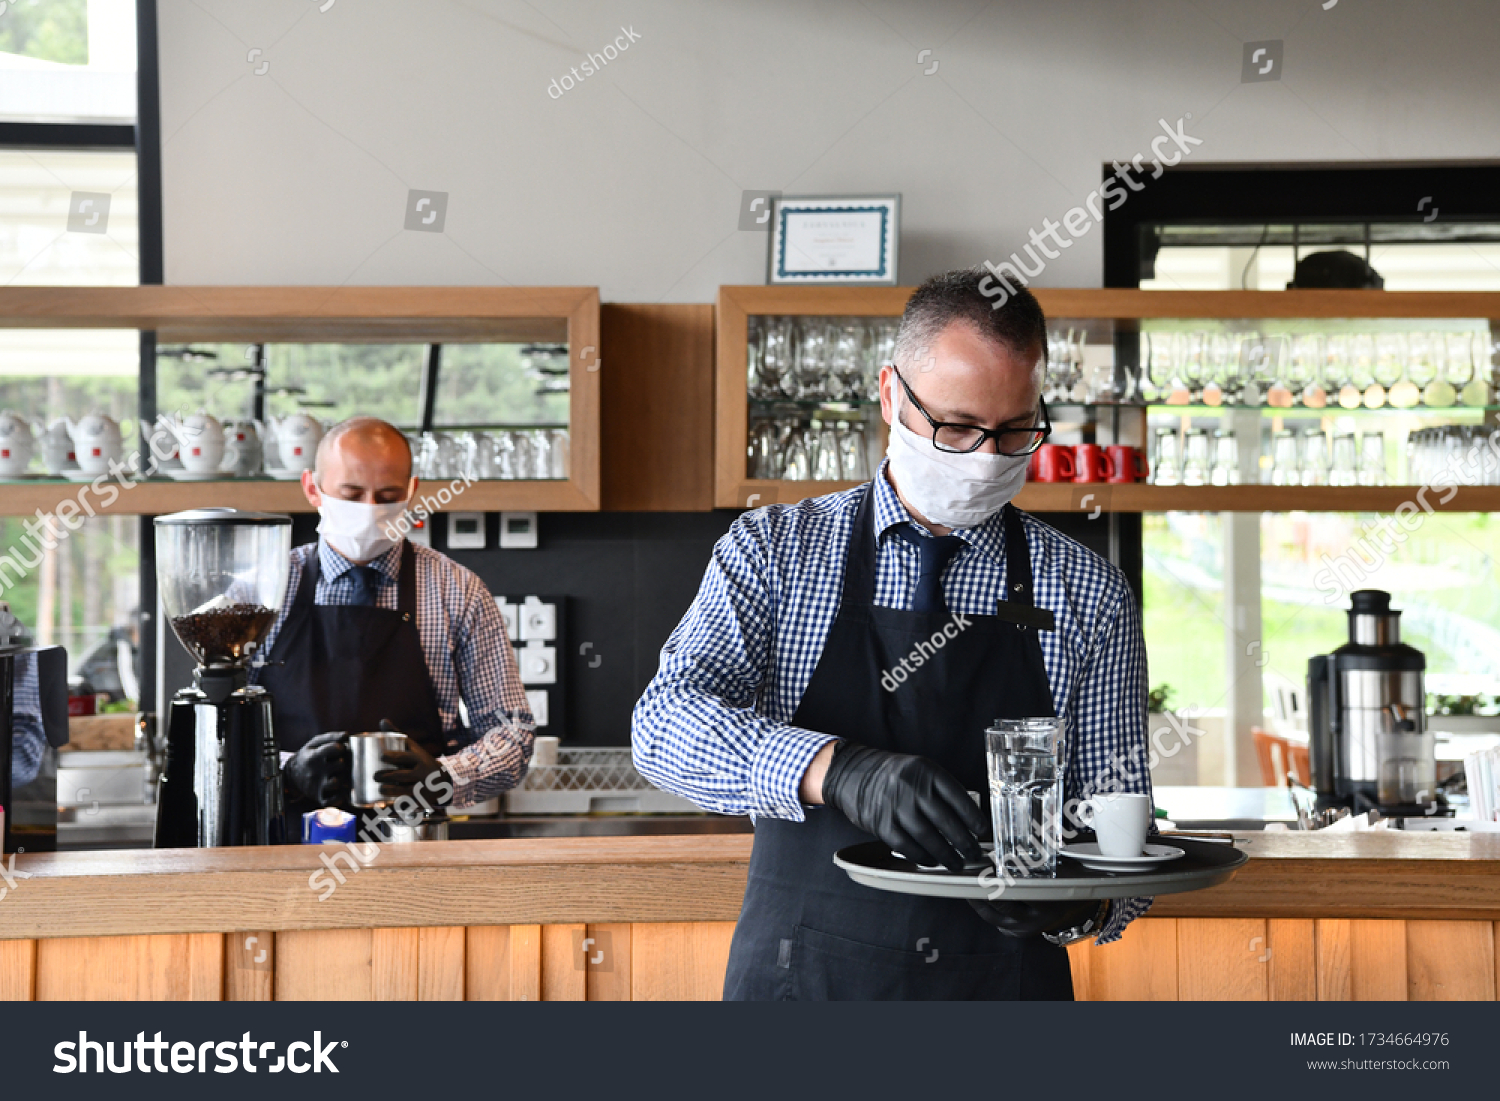 waiter in a medical protective mask serves  the coffee in restaurant durin coronavirus pandemic representing new normal concept #1734664976